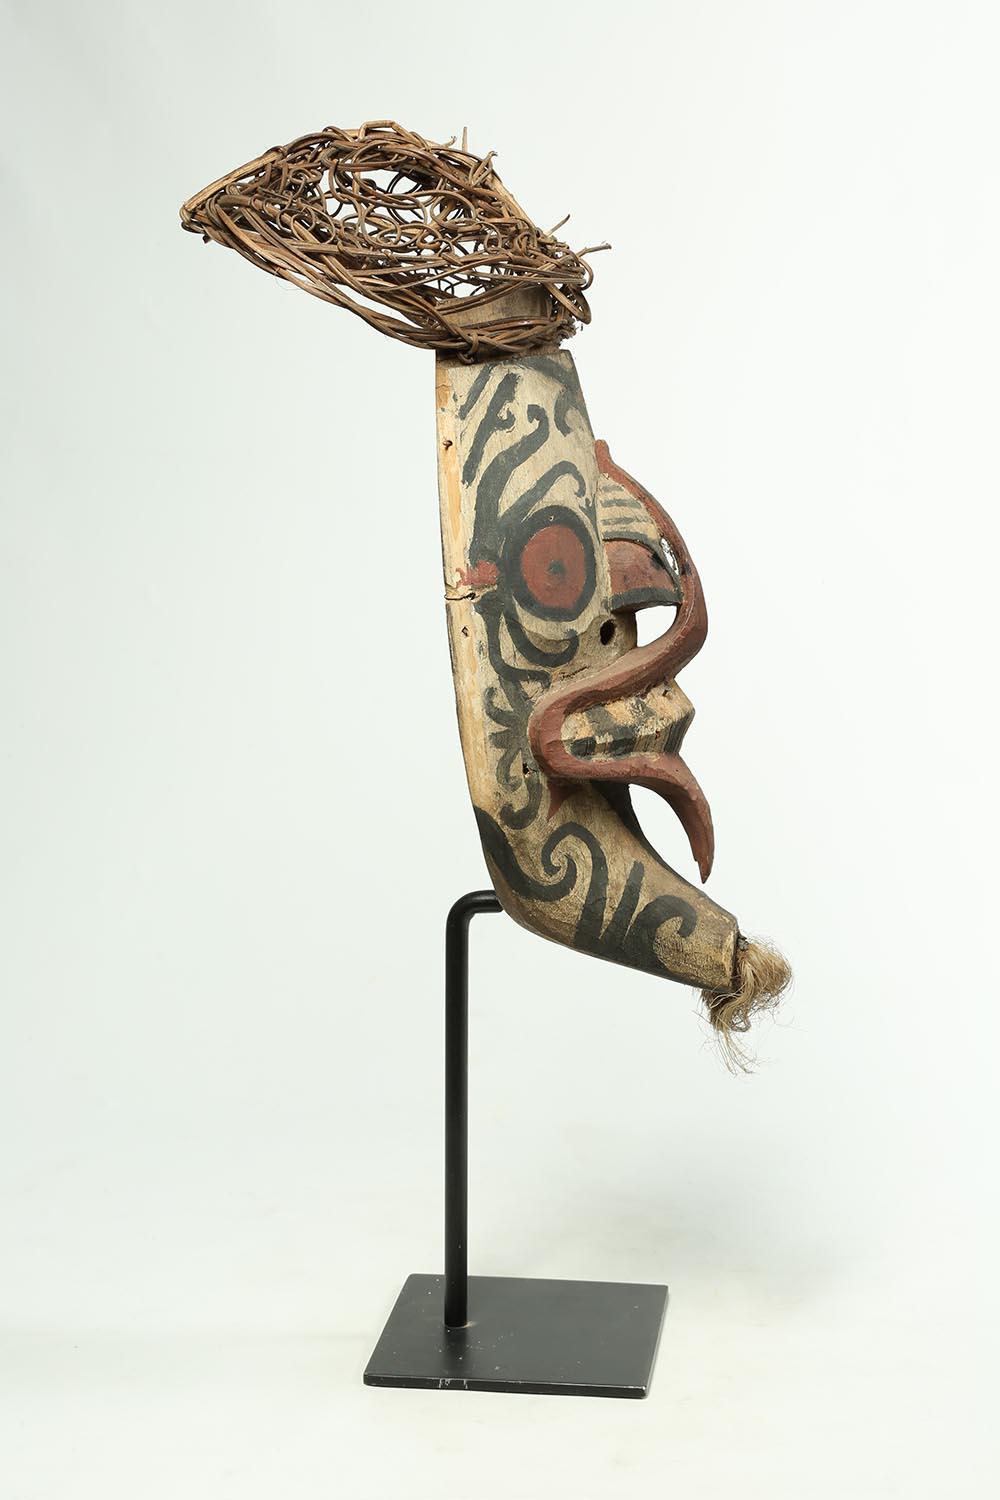 Tribal Wood and Pigment Dayak Hudoq Mask on Stand, Early 20th Century Borneo 2